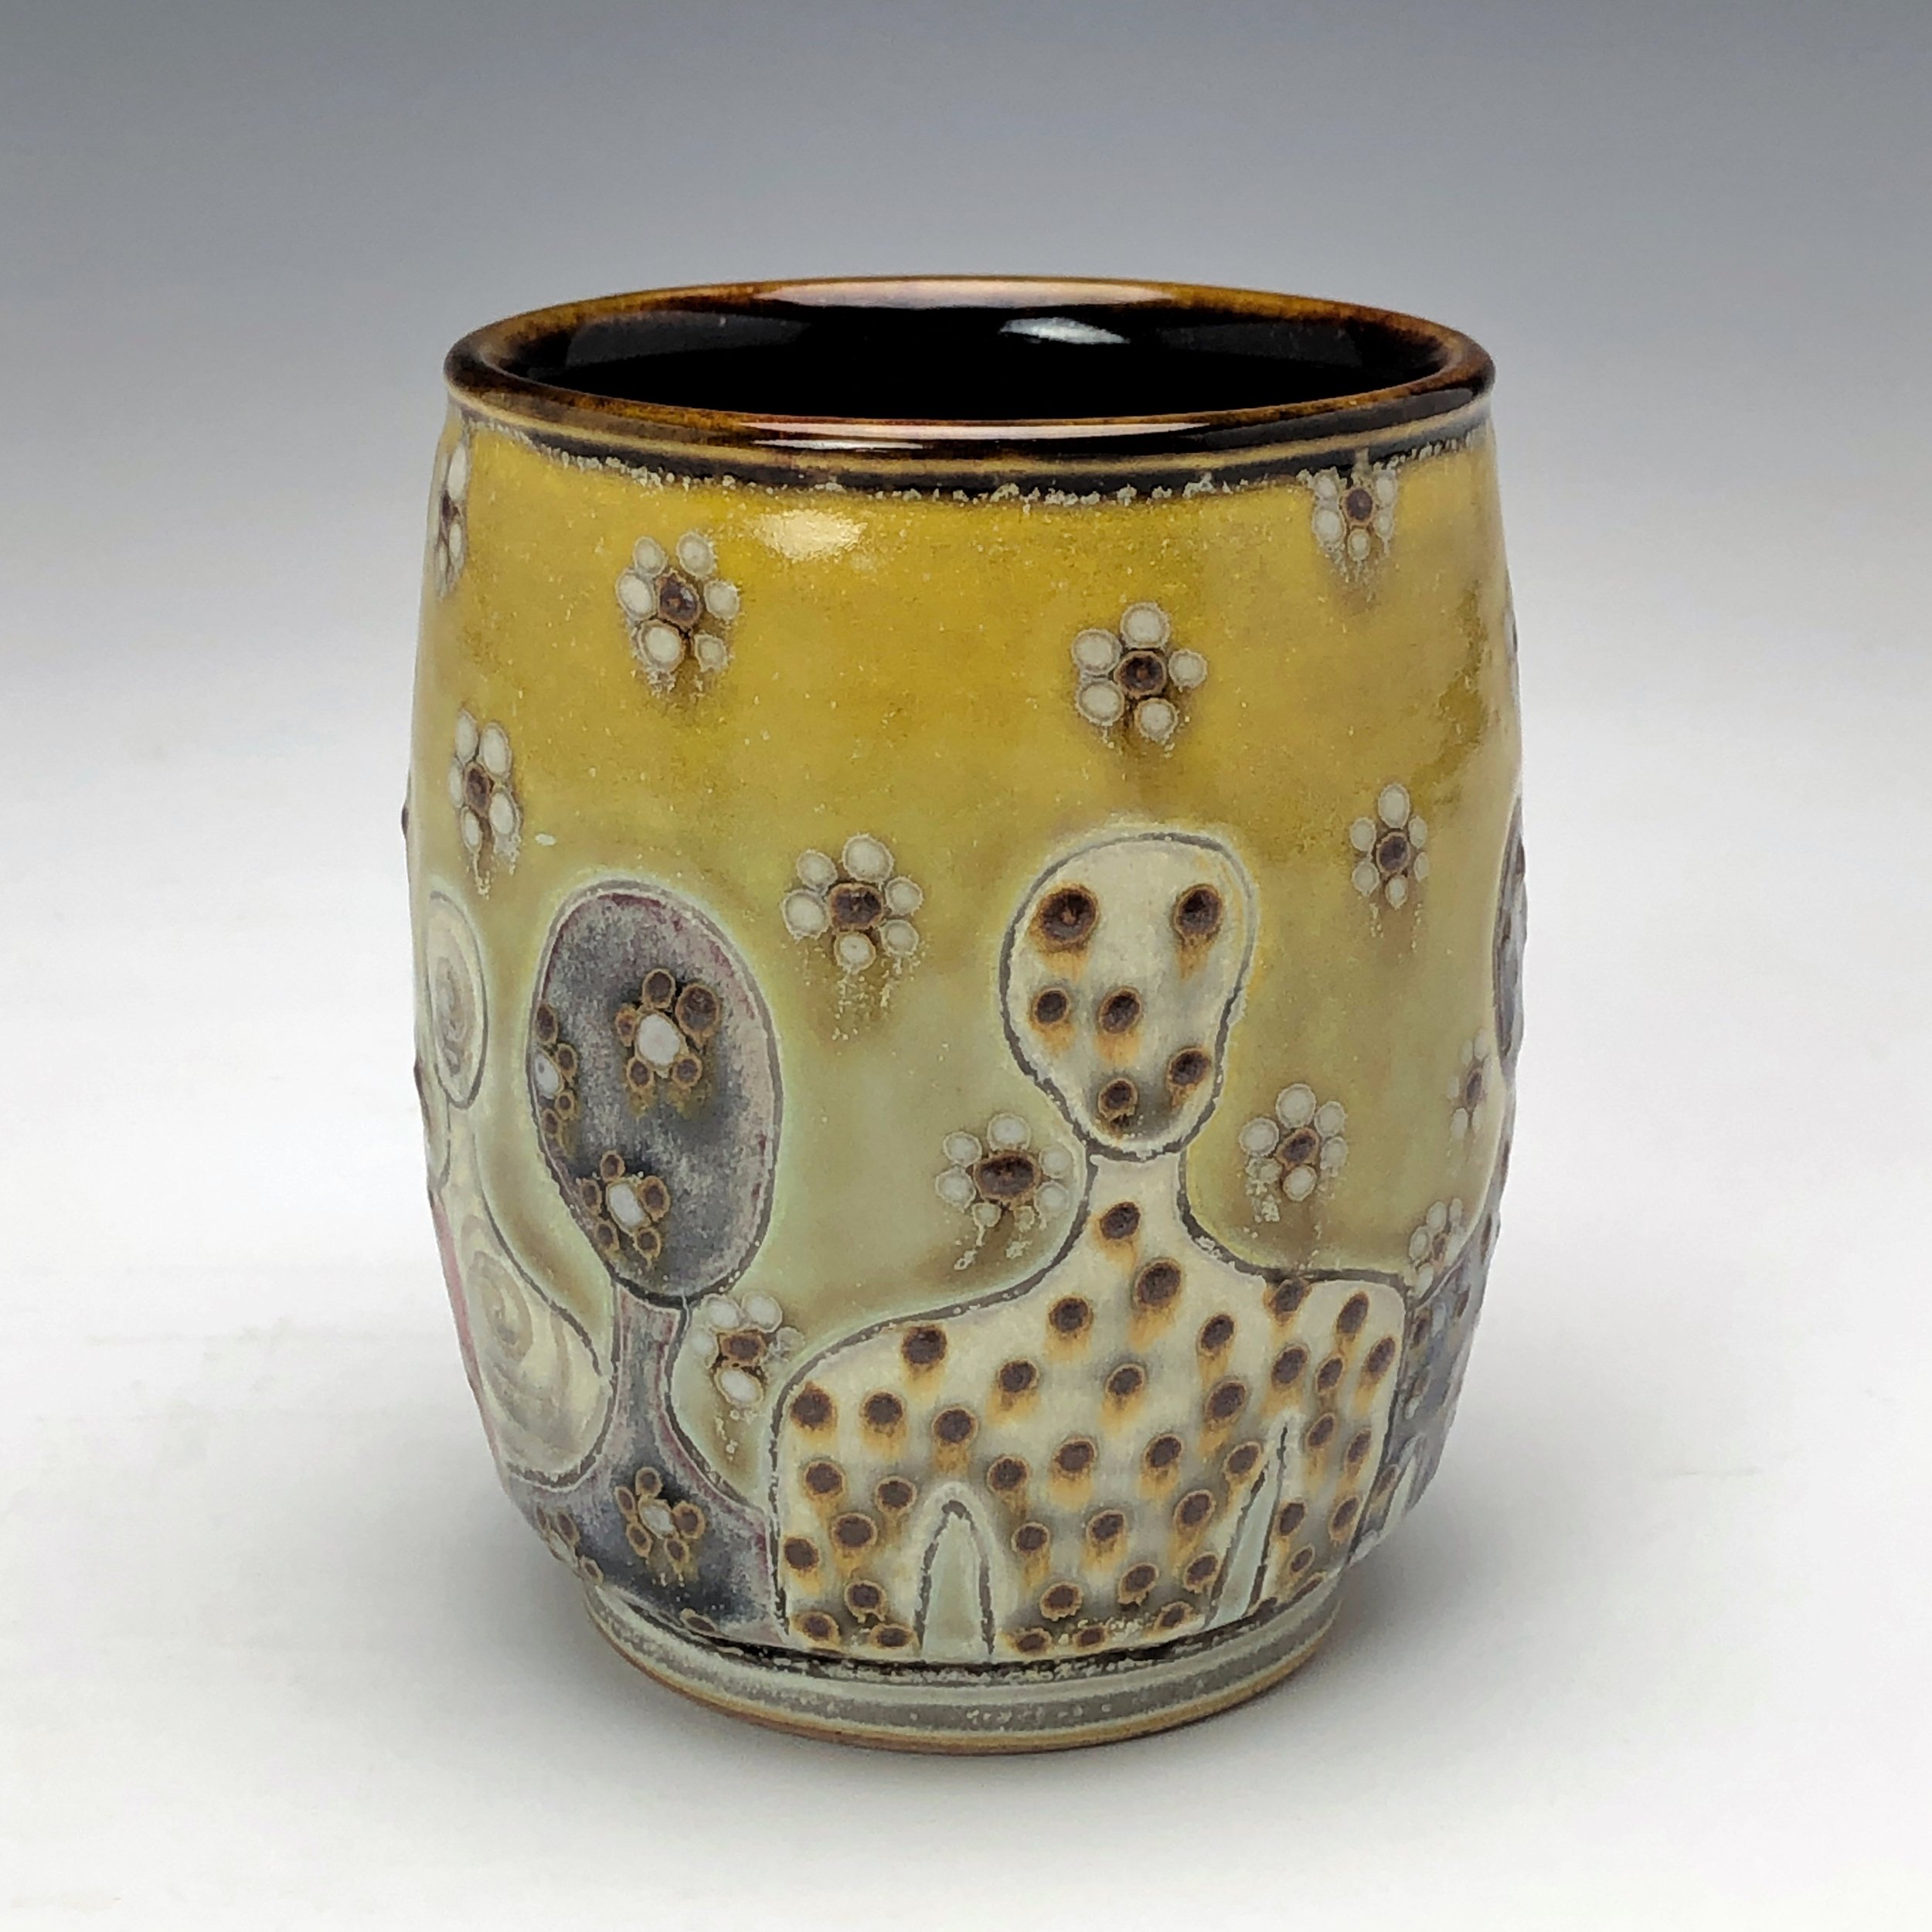  Samantha Henneke, Bulldog Pottery, Seagrove, North Carolina  Yunomi 1- Casual drinking cup made from a smooth white porcelaneous clay body. Figurative decoration with slip and glaze dot patterns. Translucent vellum glaze over various underglaze colo